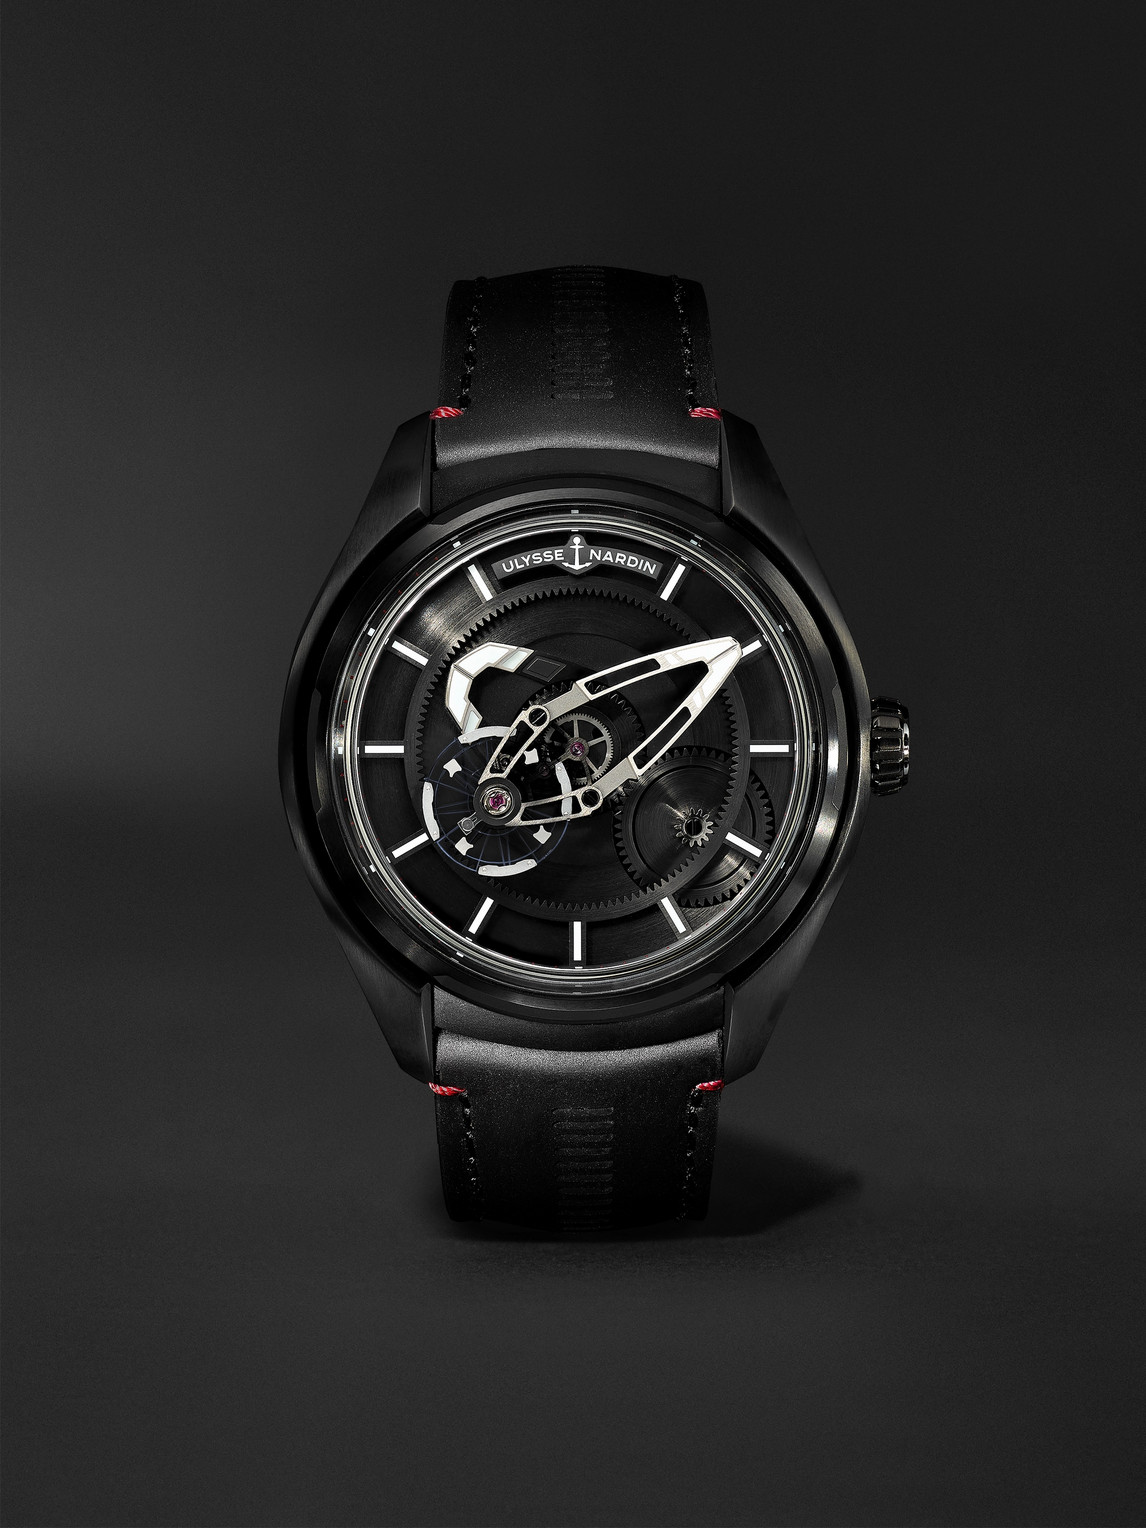 Ulysse Nardin Freak X Ti Automatic 43mm Titanium And Leather Watch, Ref. No. 2303-270.1 In Black